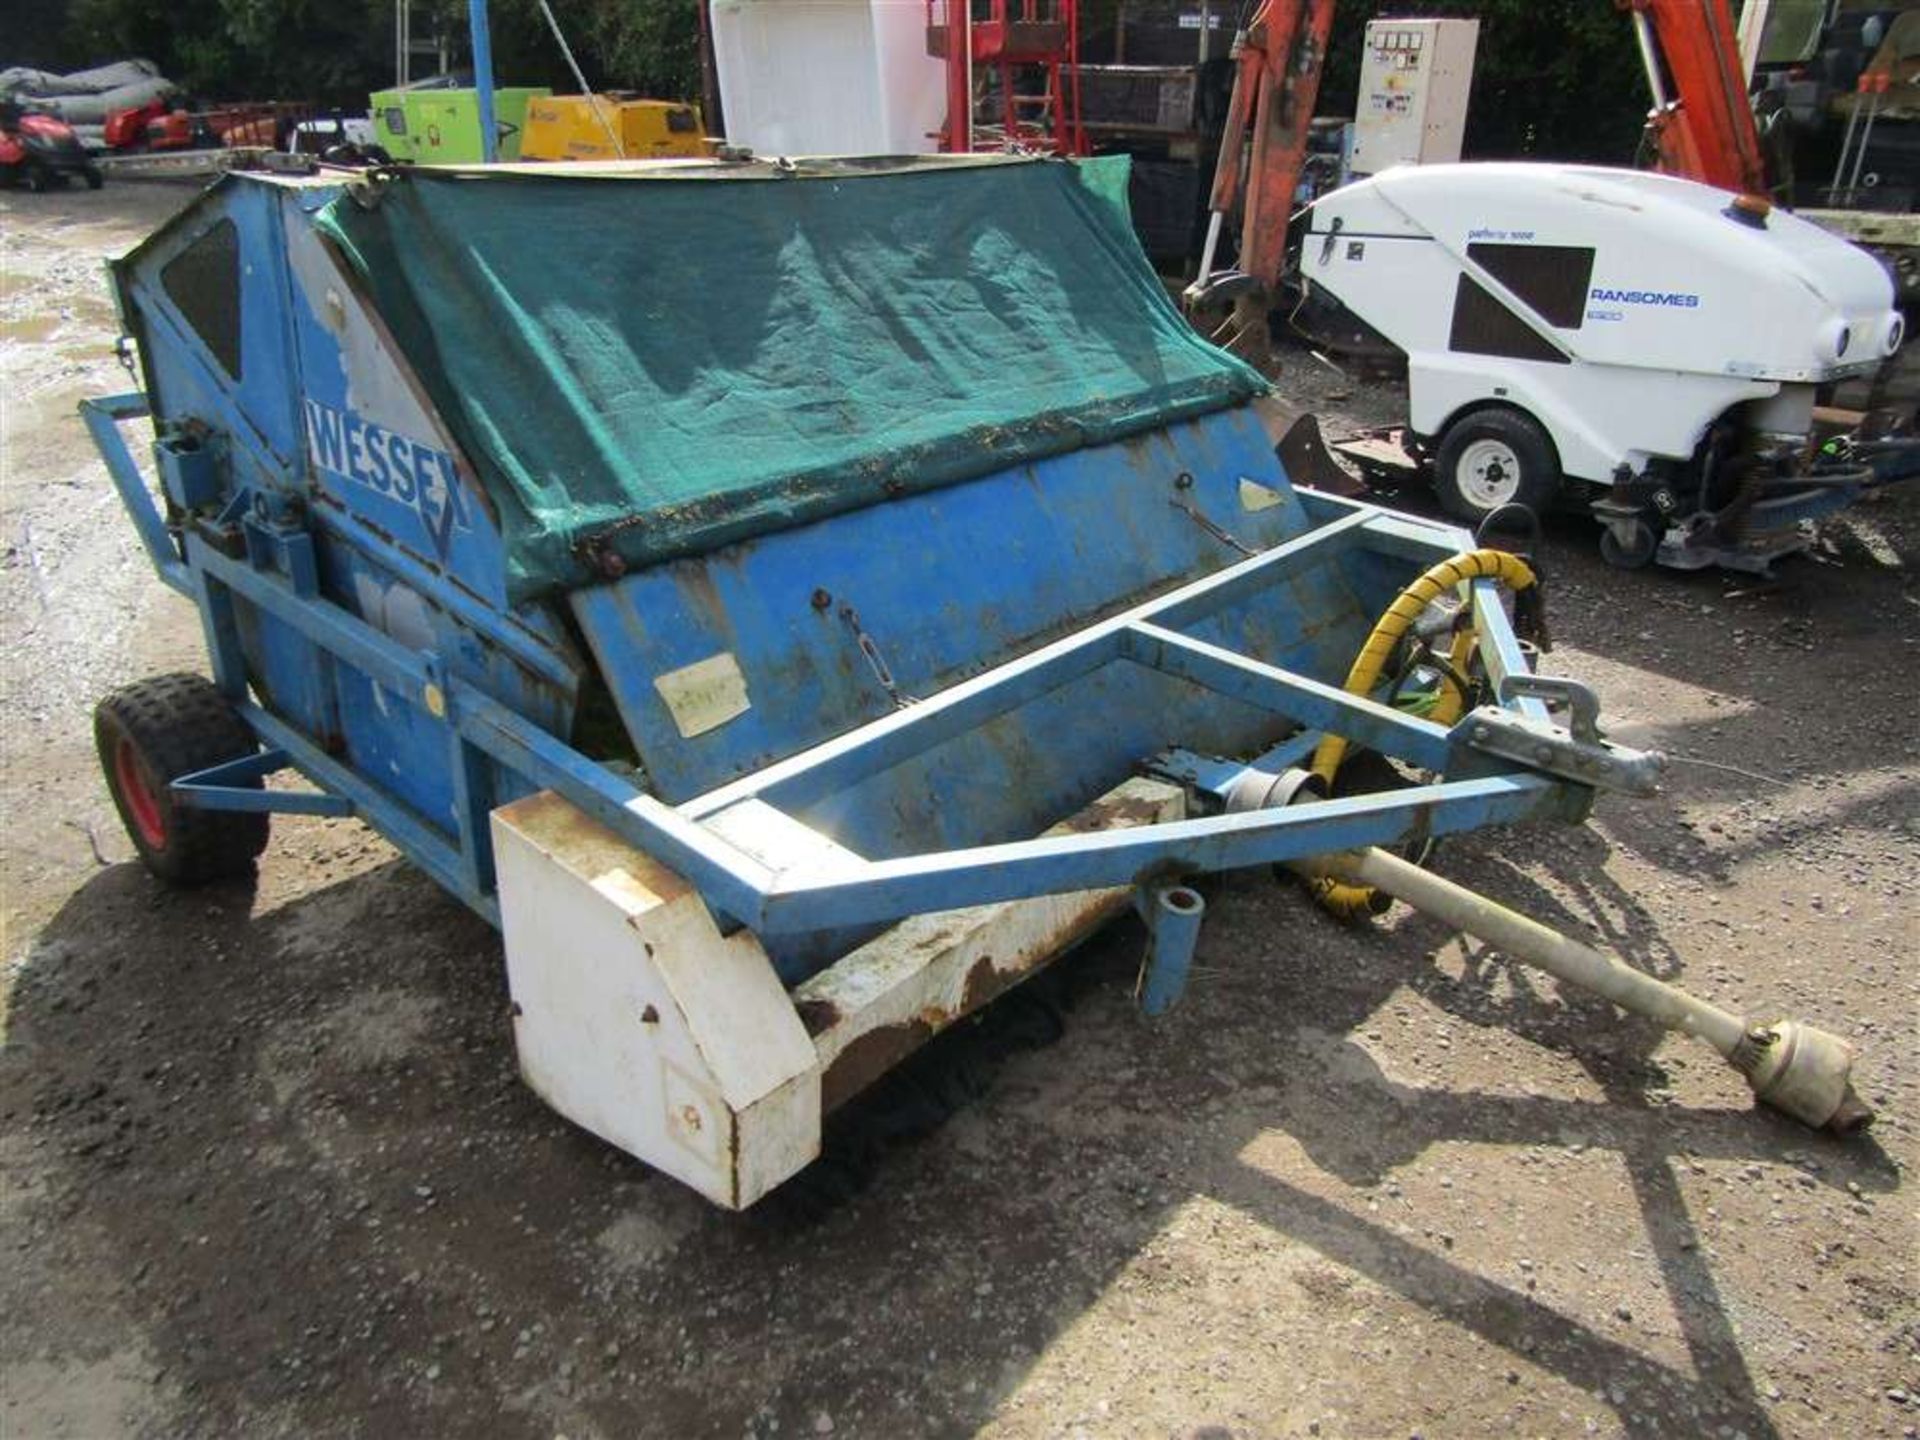 Wessex SC 60 Tractor Sweeper Collector c/w PTO